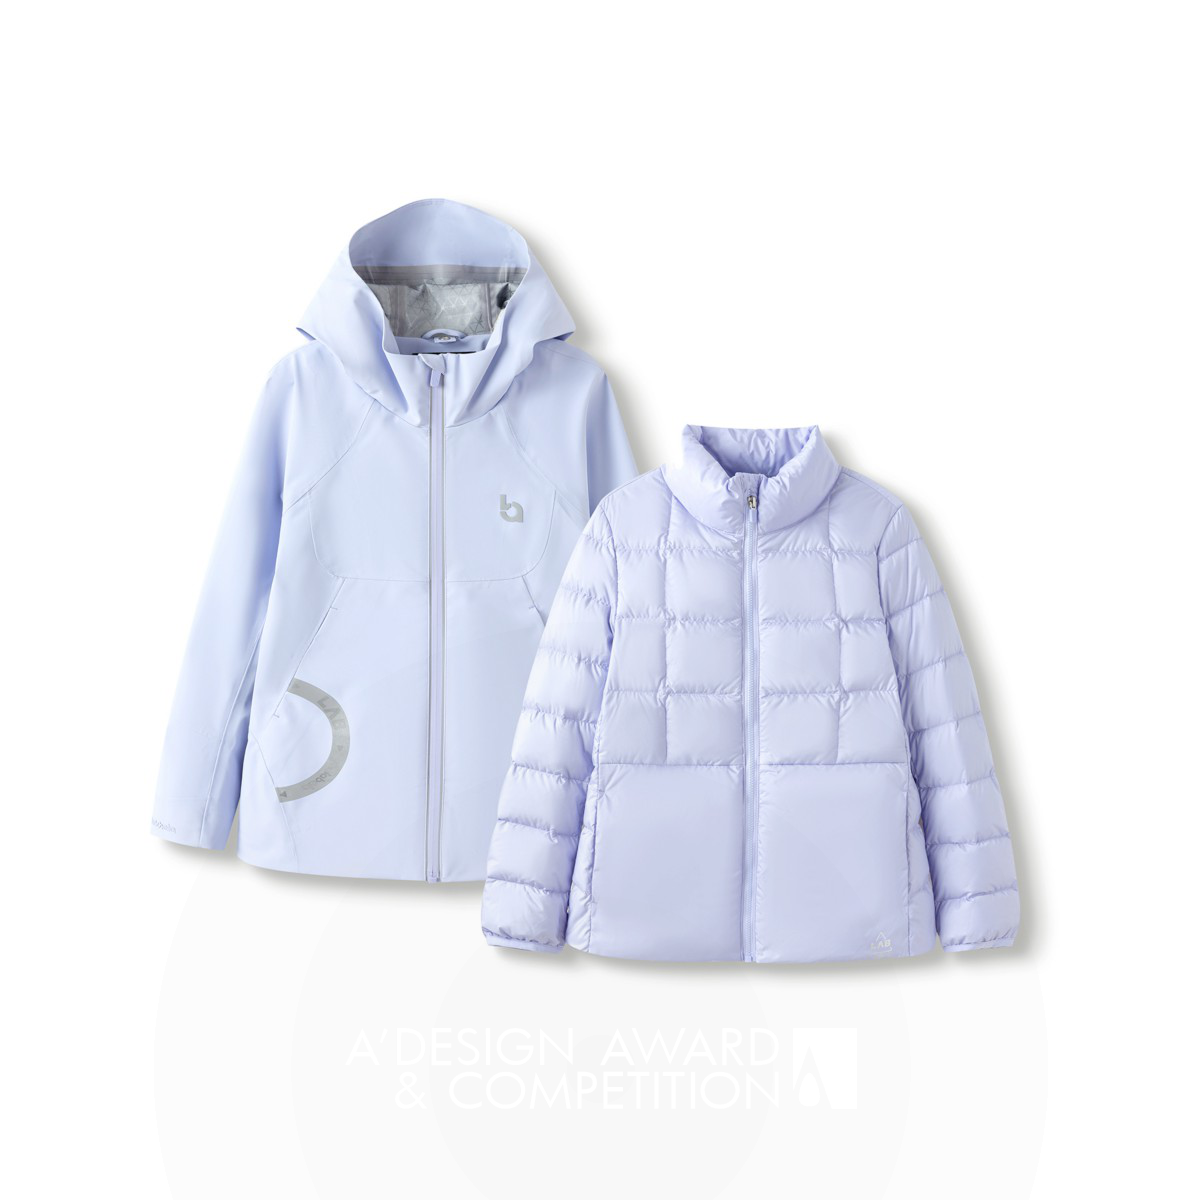 Growing Shell Down Jacket Kids' Clothing